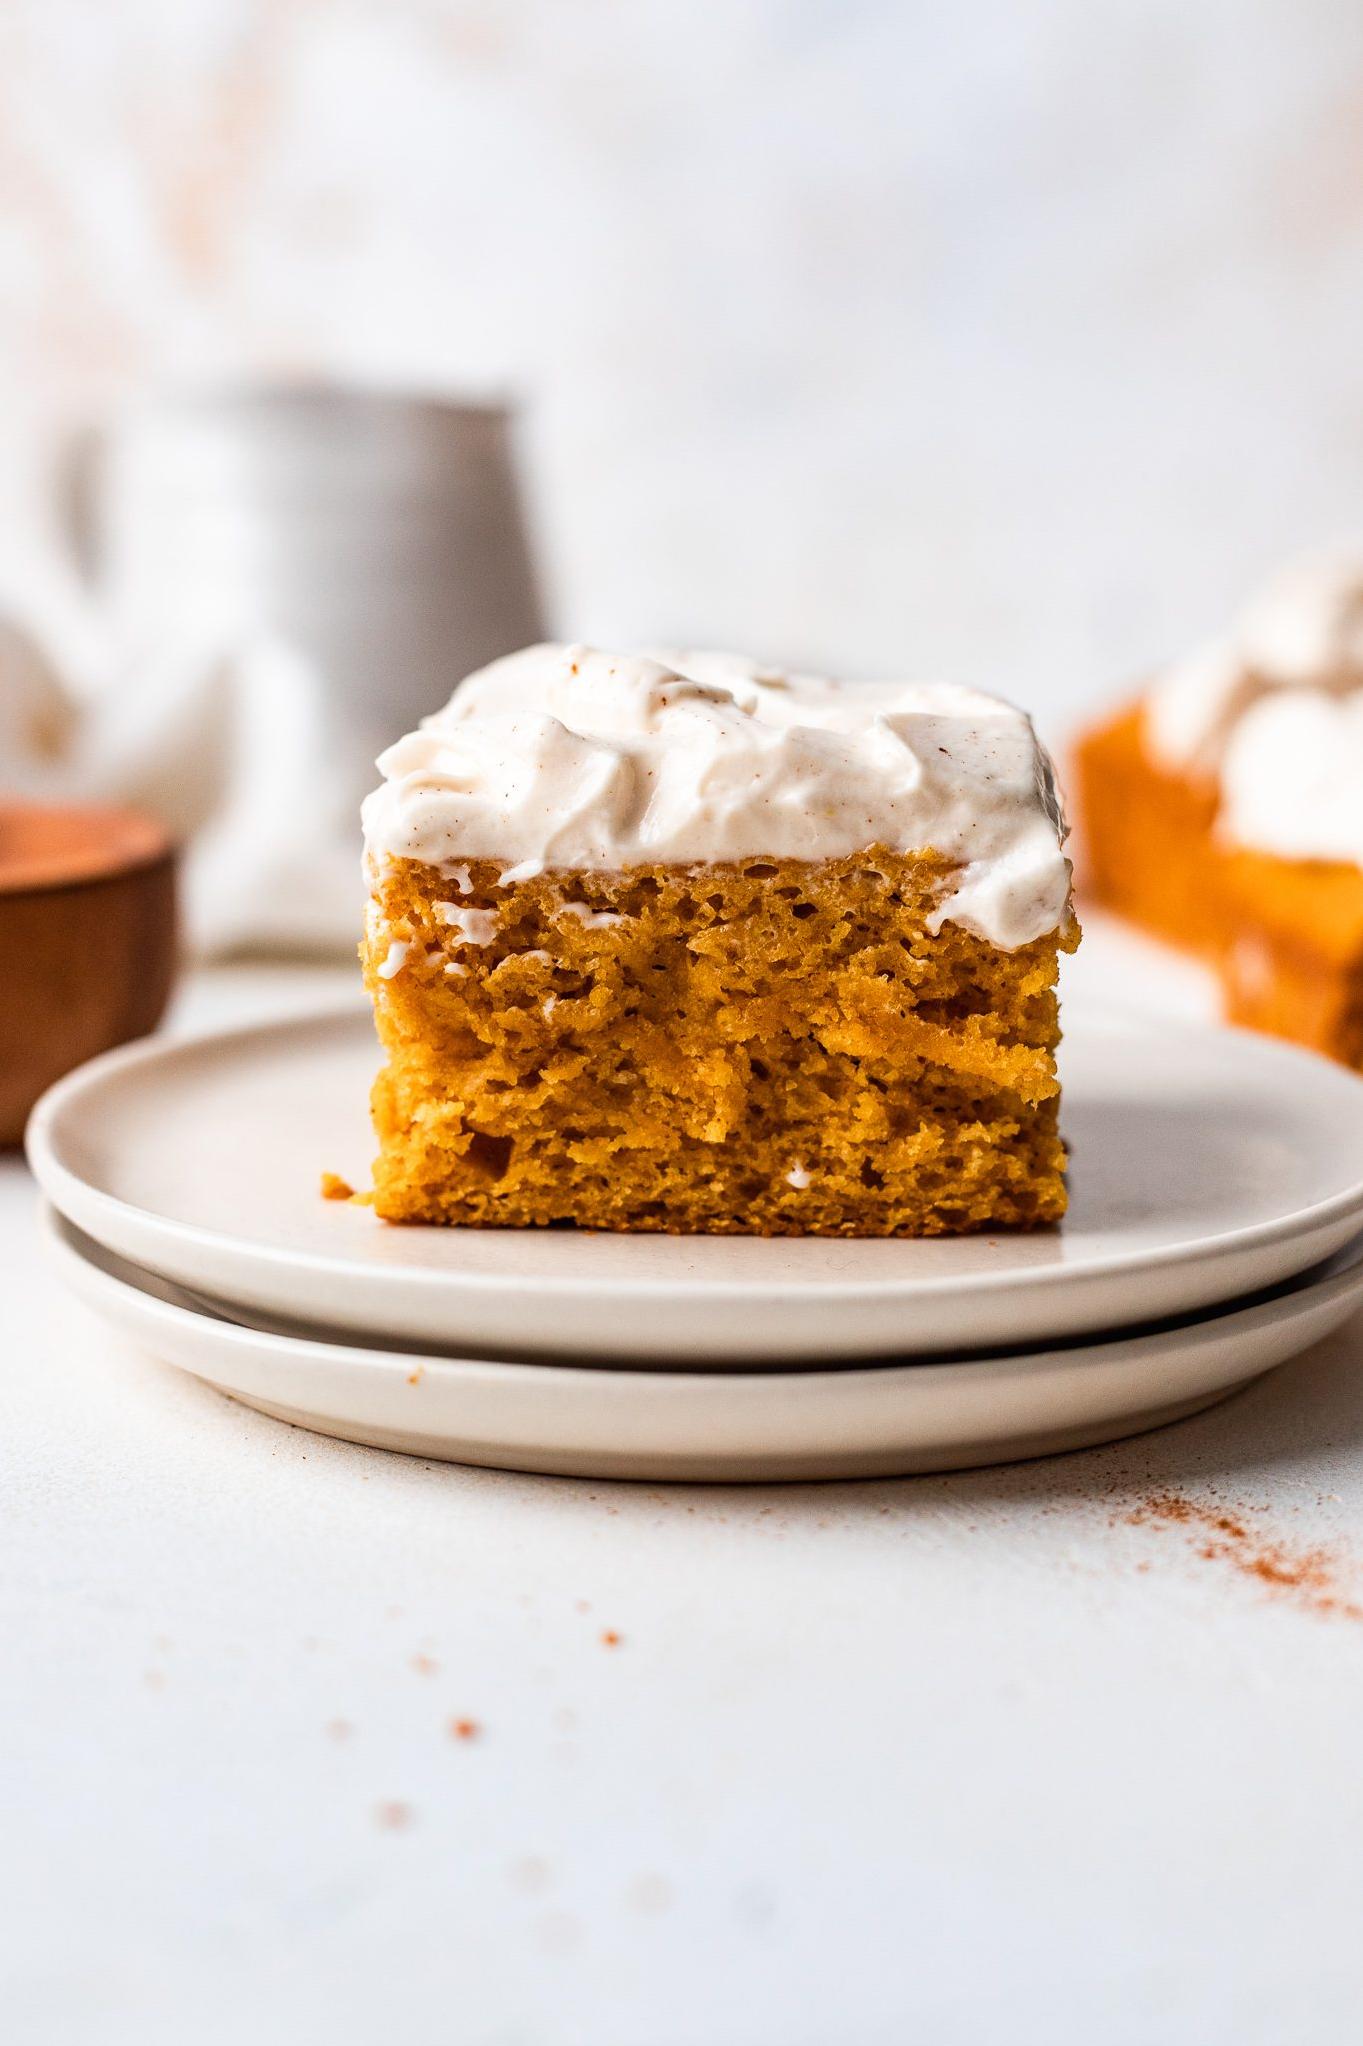  The perfect frosting to add a fall flair to your baked goods